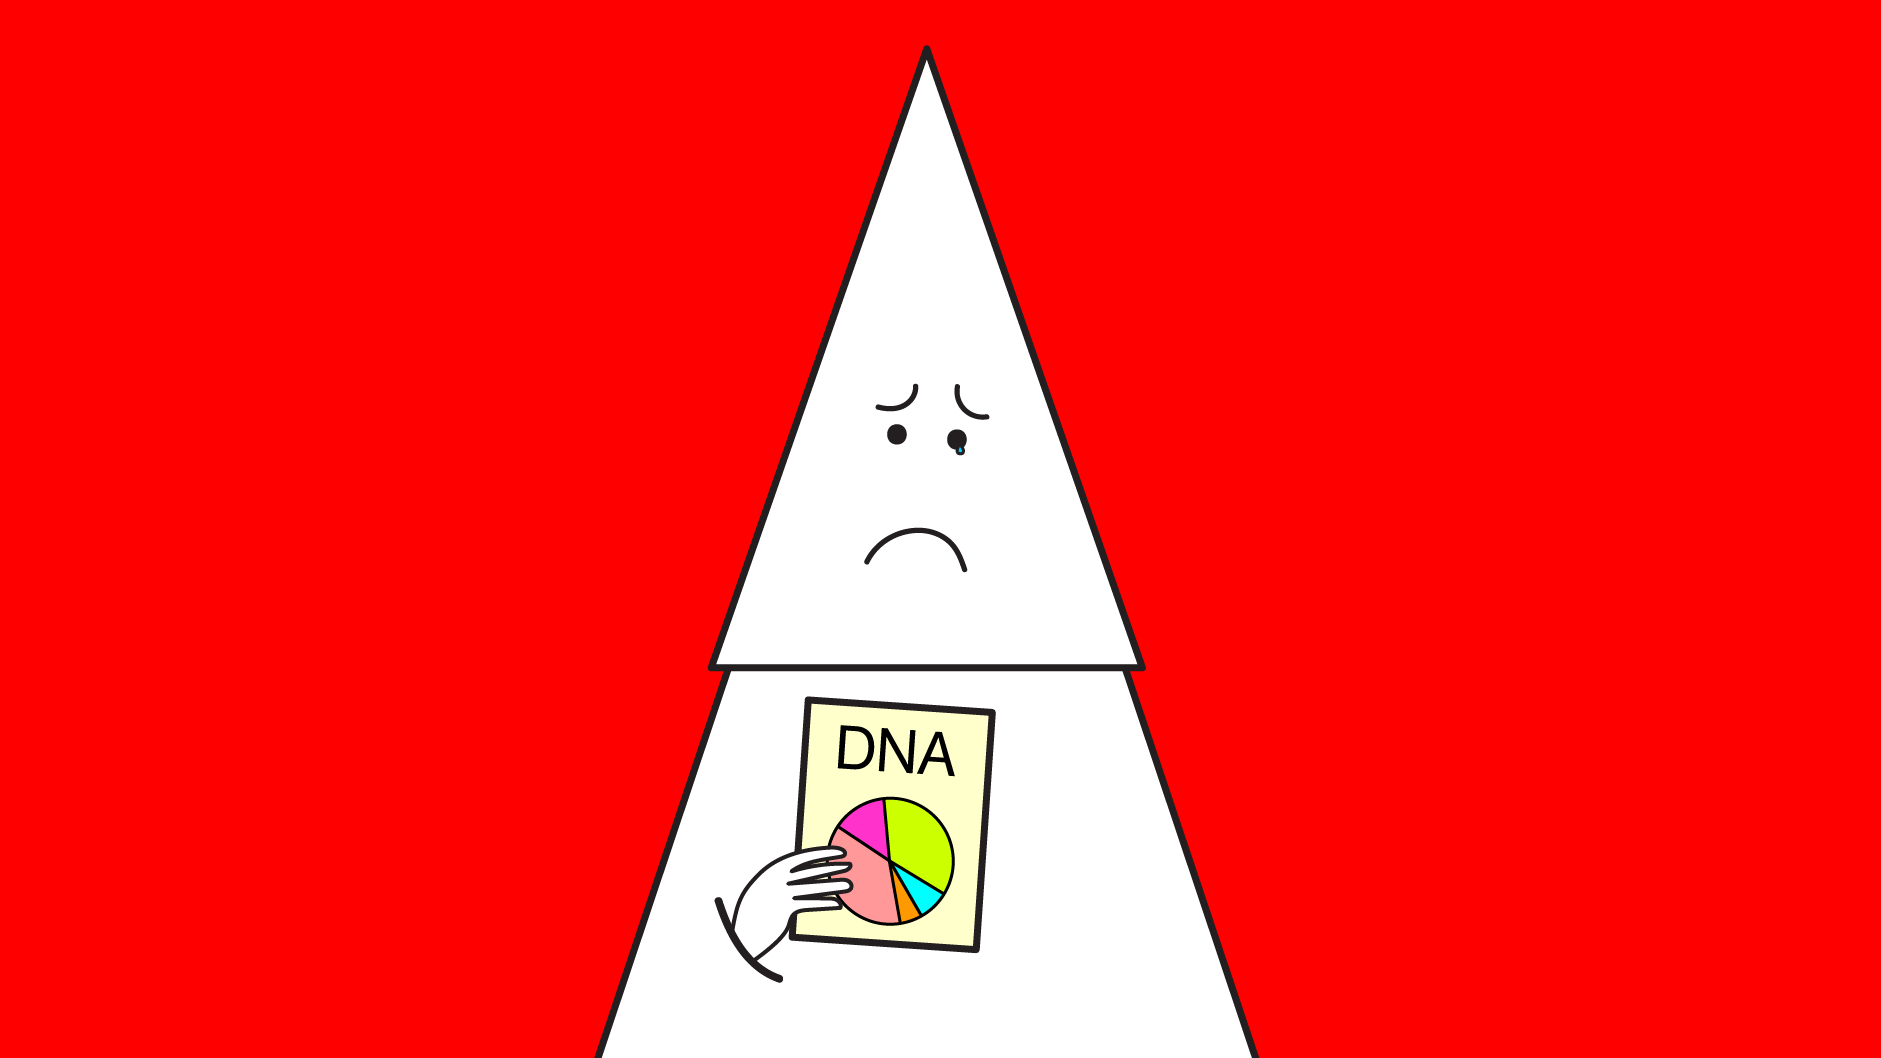 <b><a href=“https://www.technologyreview.com/the-download/608673/white-supremacists-have-stumbled-into-a-huge-issue-in-genetic-ancestry-testing/“>White Supremacists Have Stumbled Into a Huge Issue in Genetic Ancestry Testing</a></b> <br> Illustration by Mr. Tech